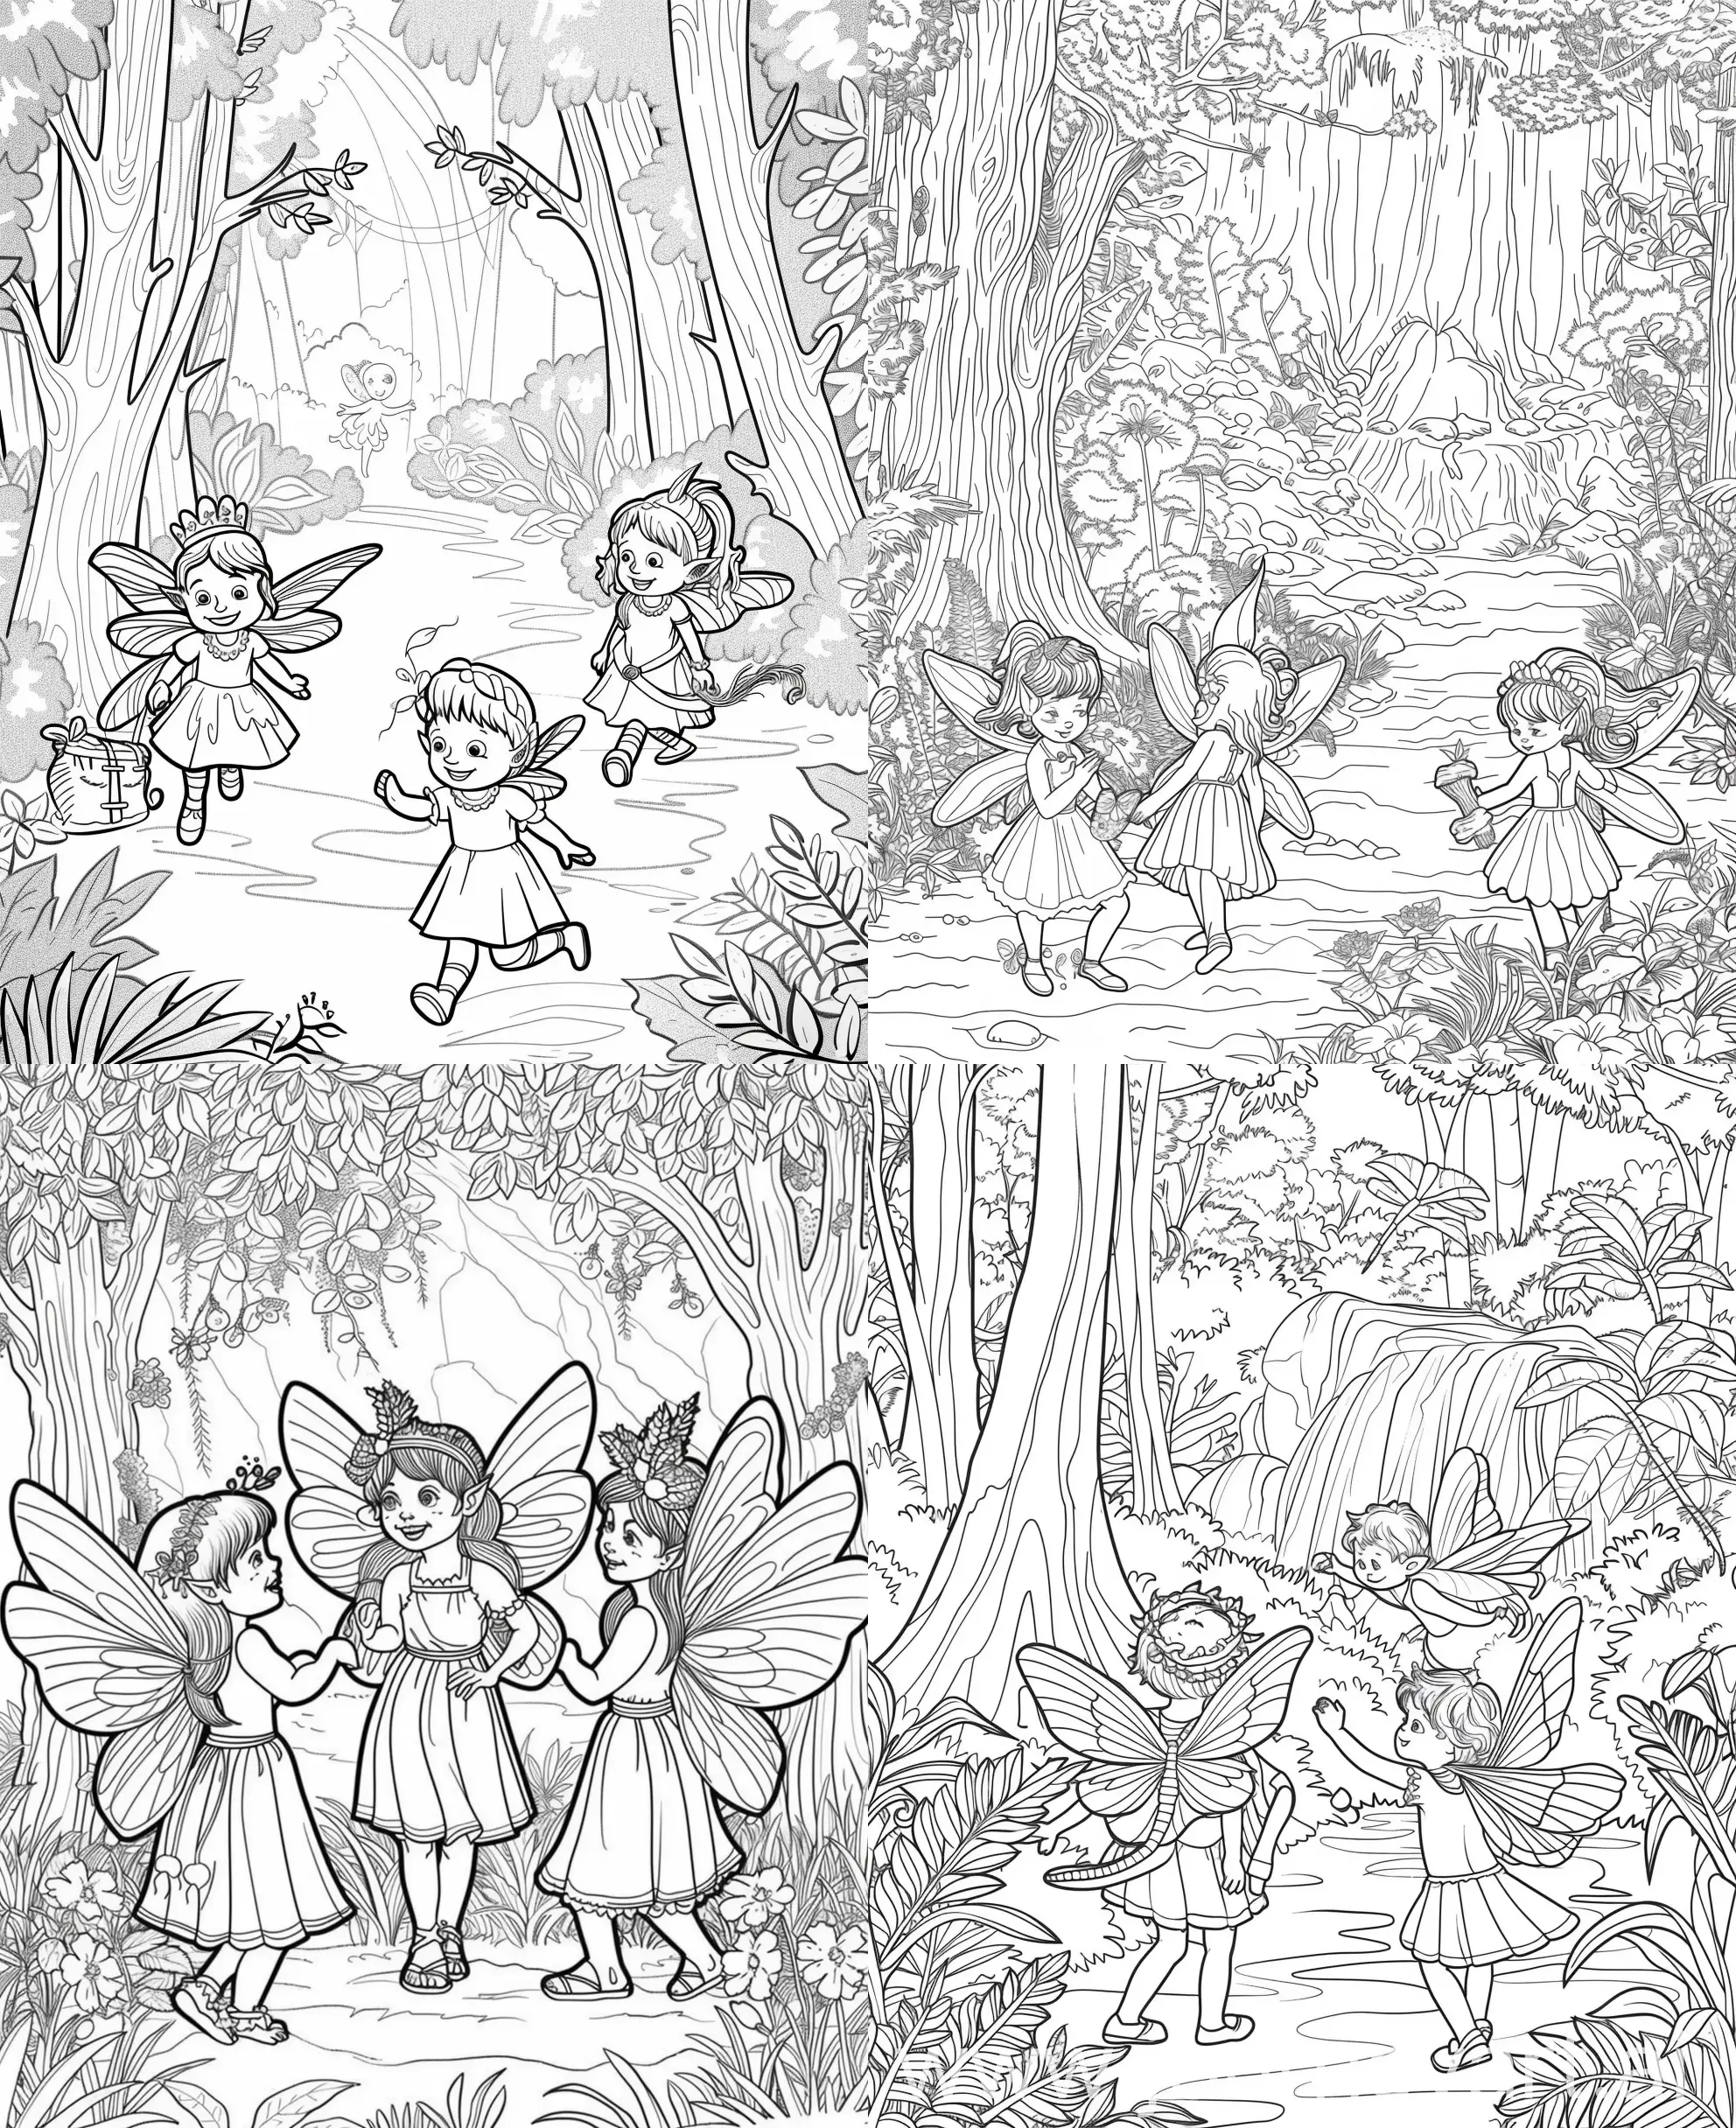 coloring page for kids, fairies in forest landscape, cartoon style, thick lines, low details, no shading --ar 9:11 --v 6